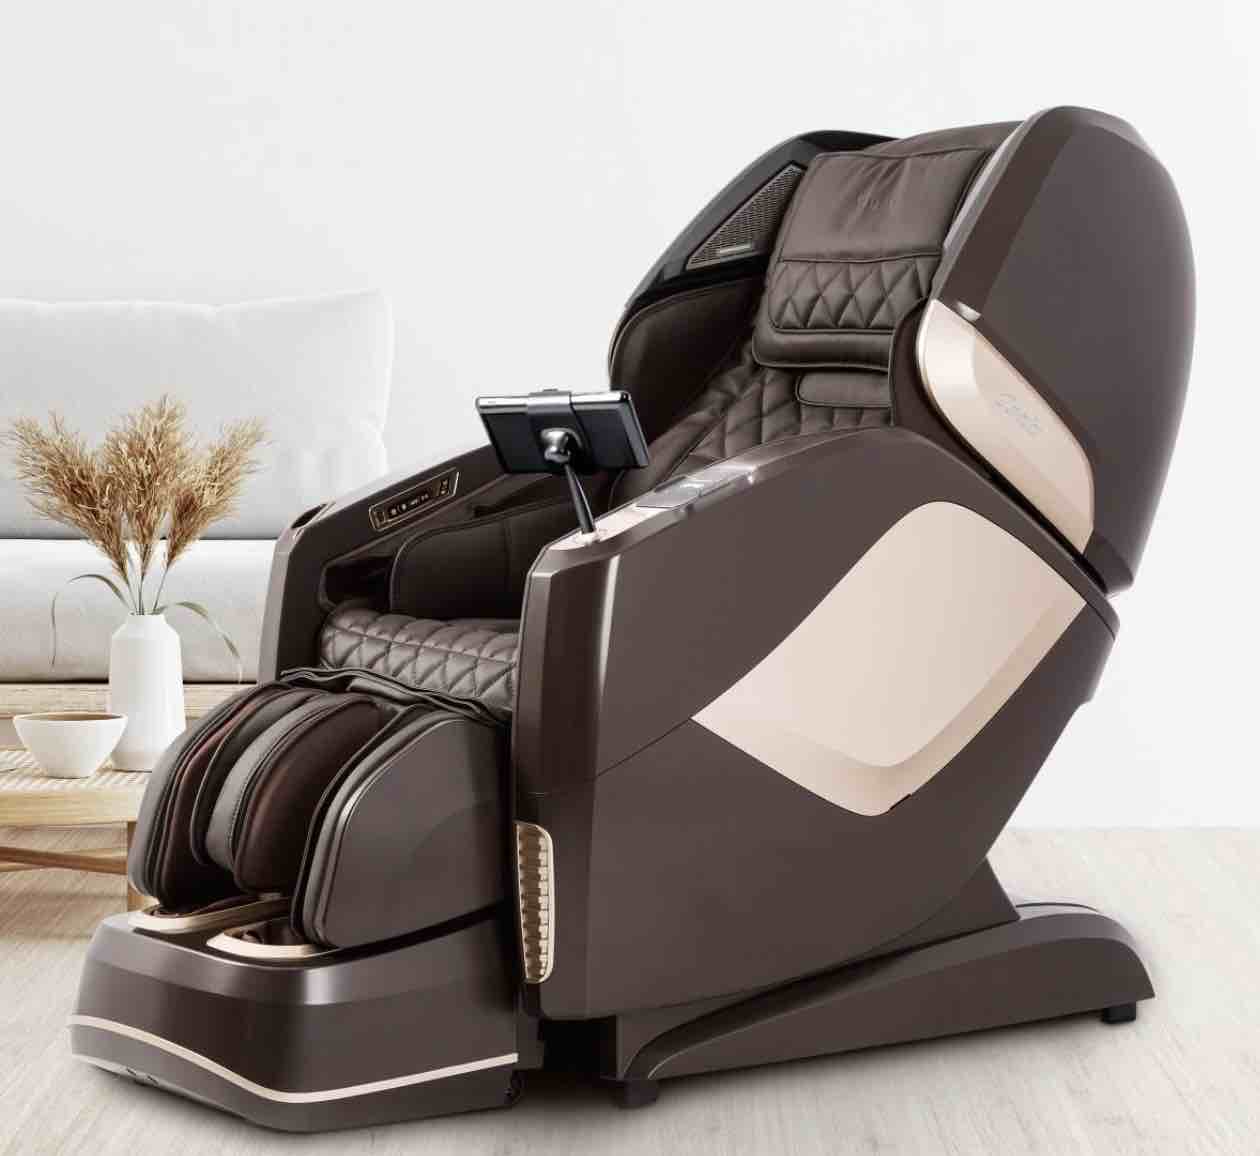 Osaki OS-Pro Maestro LE  4D Massage Chair - 5 YEAR FREE EXTENDED WARRANTY